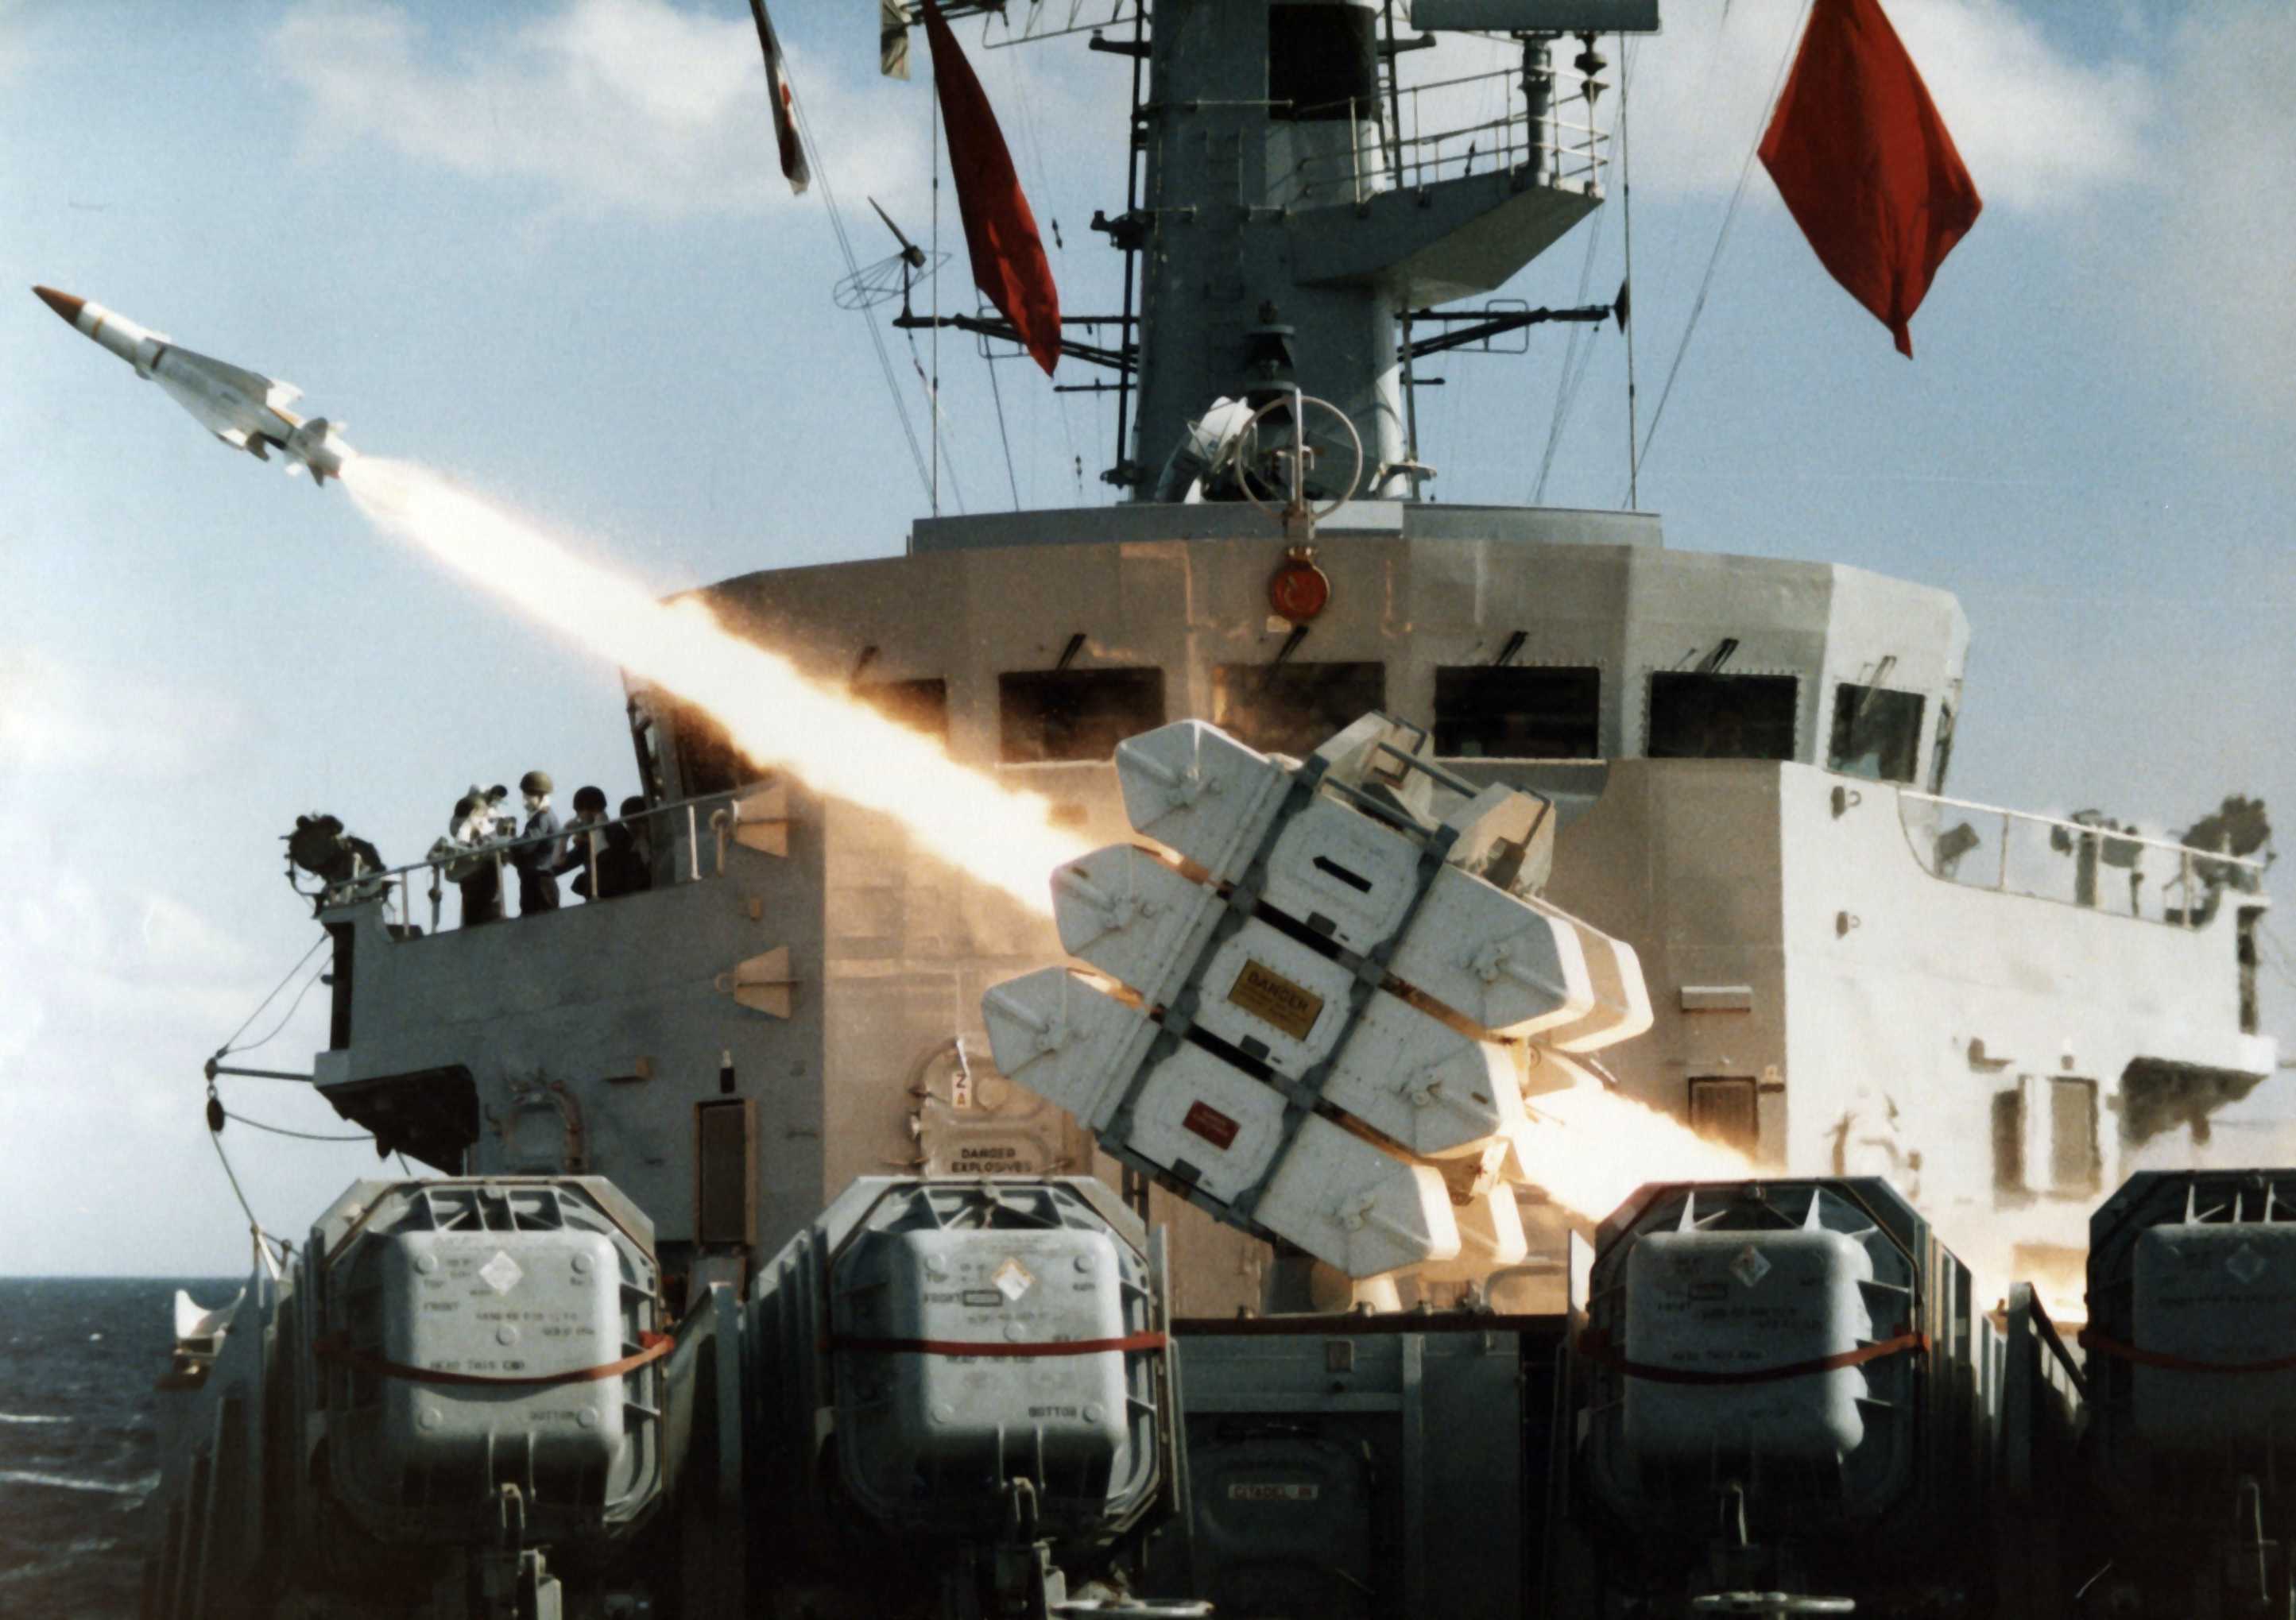 Seawolf missile being fired from HMS Brasen British Navy Ship